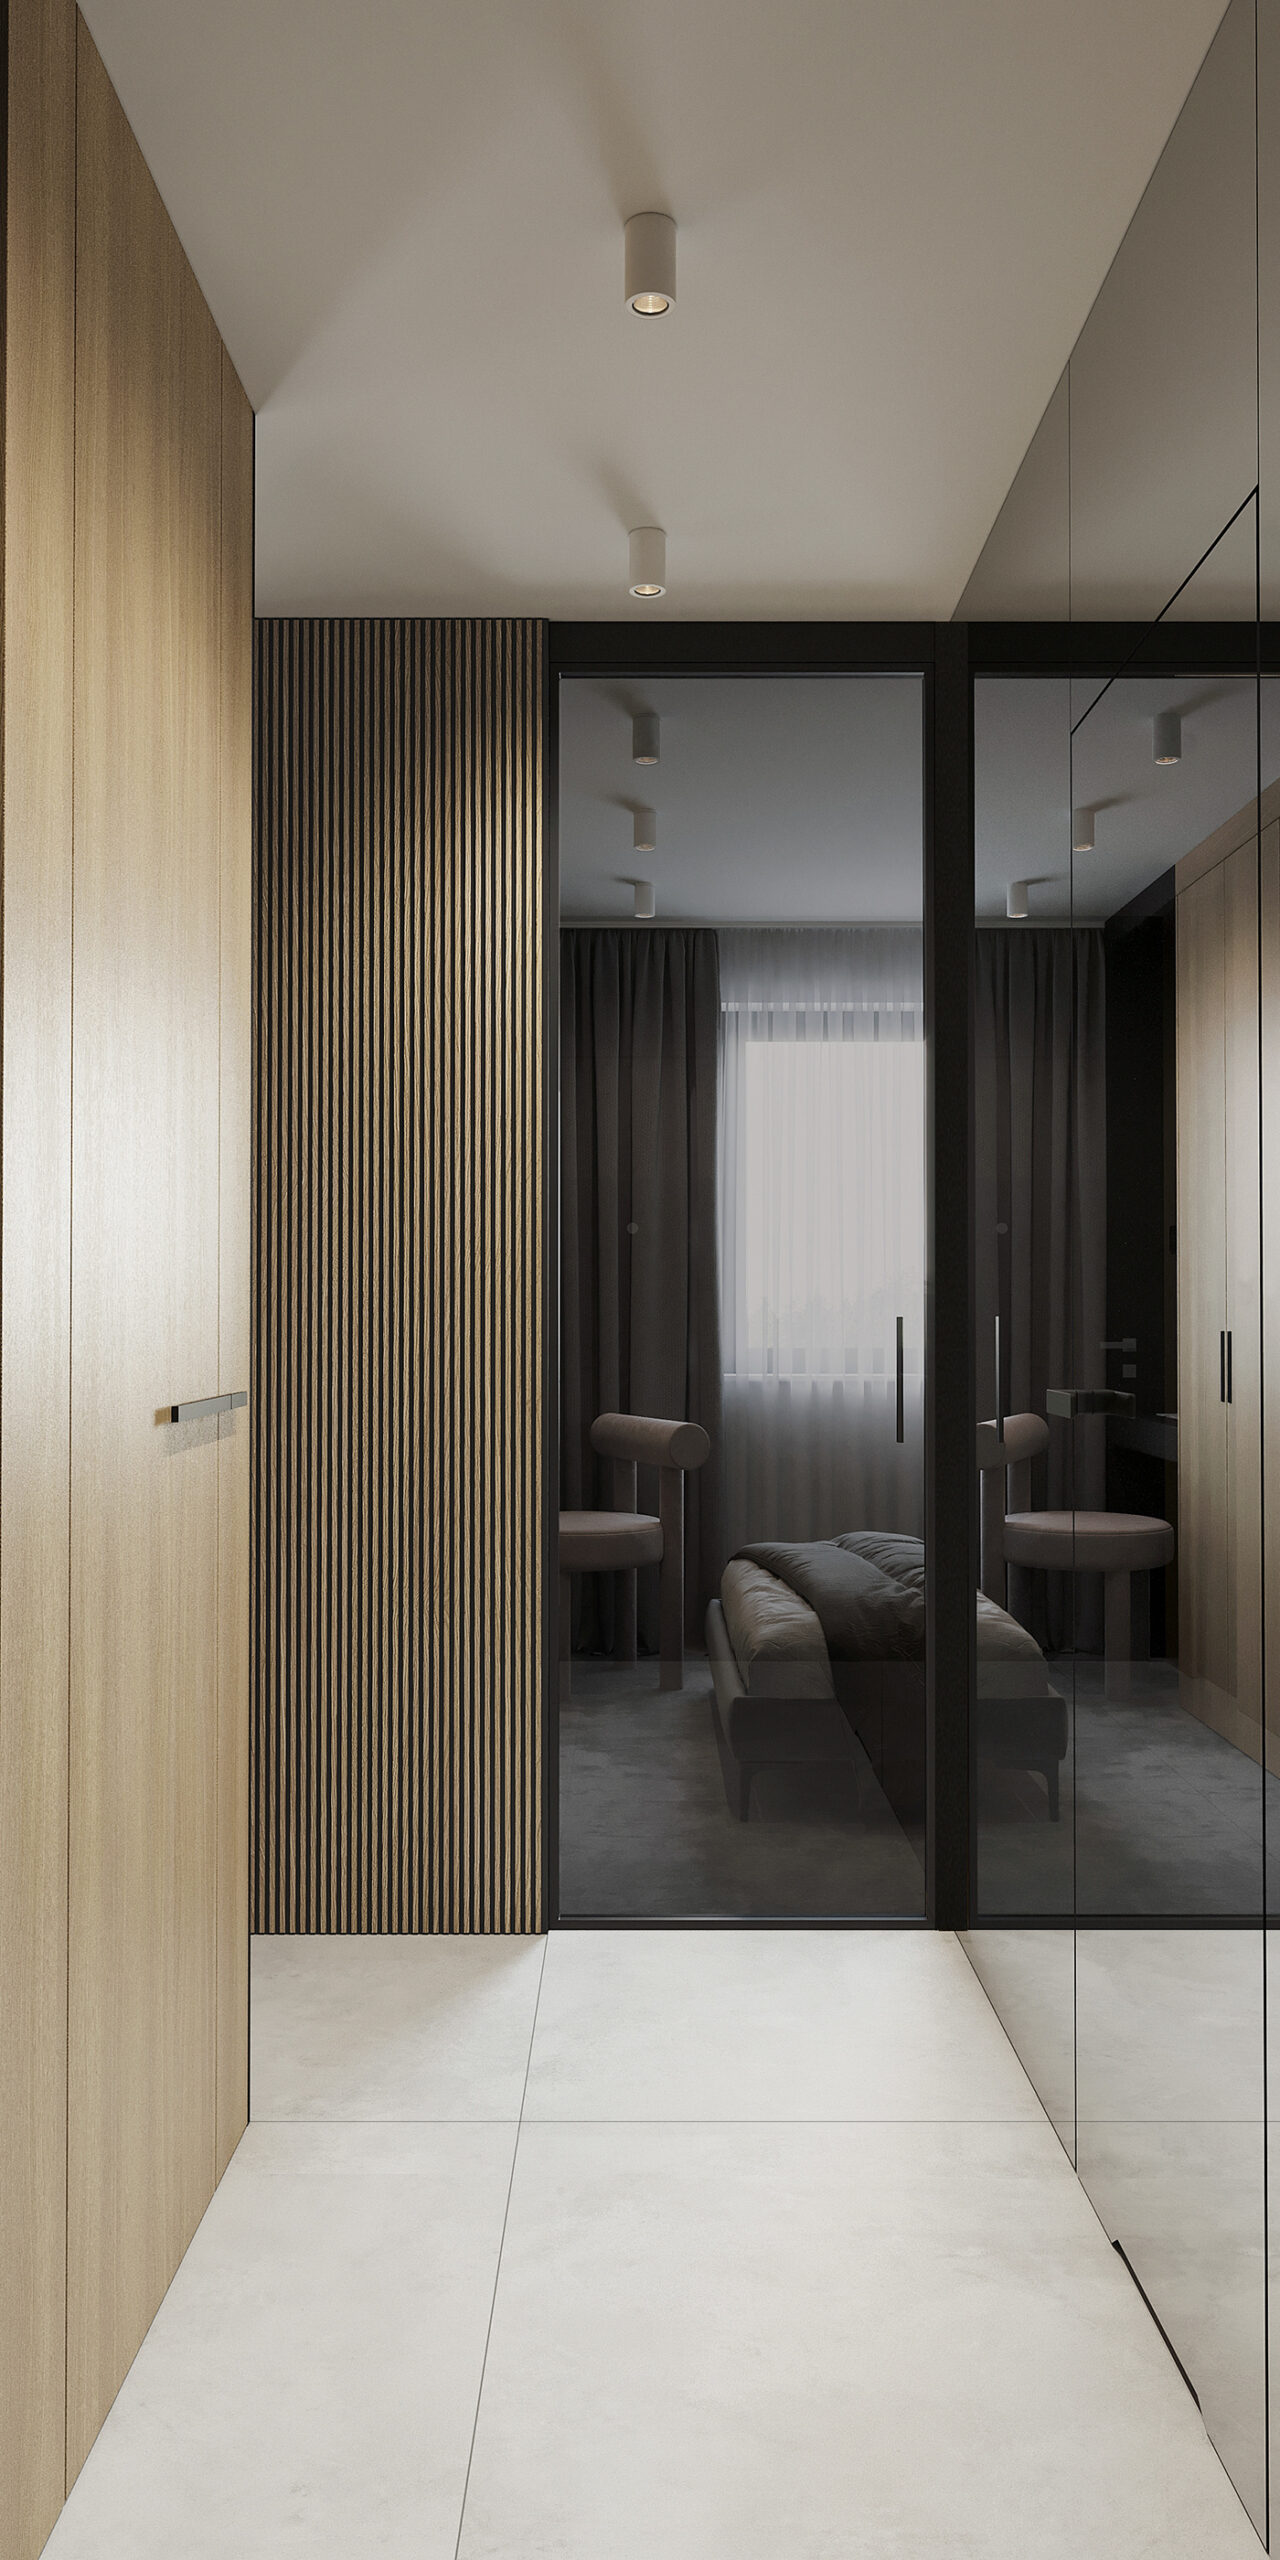 Another hallway is fitted with mirrors to create the effect of expanding the space and dividing the area.